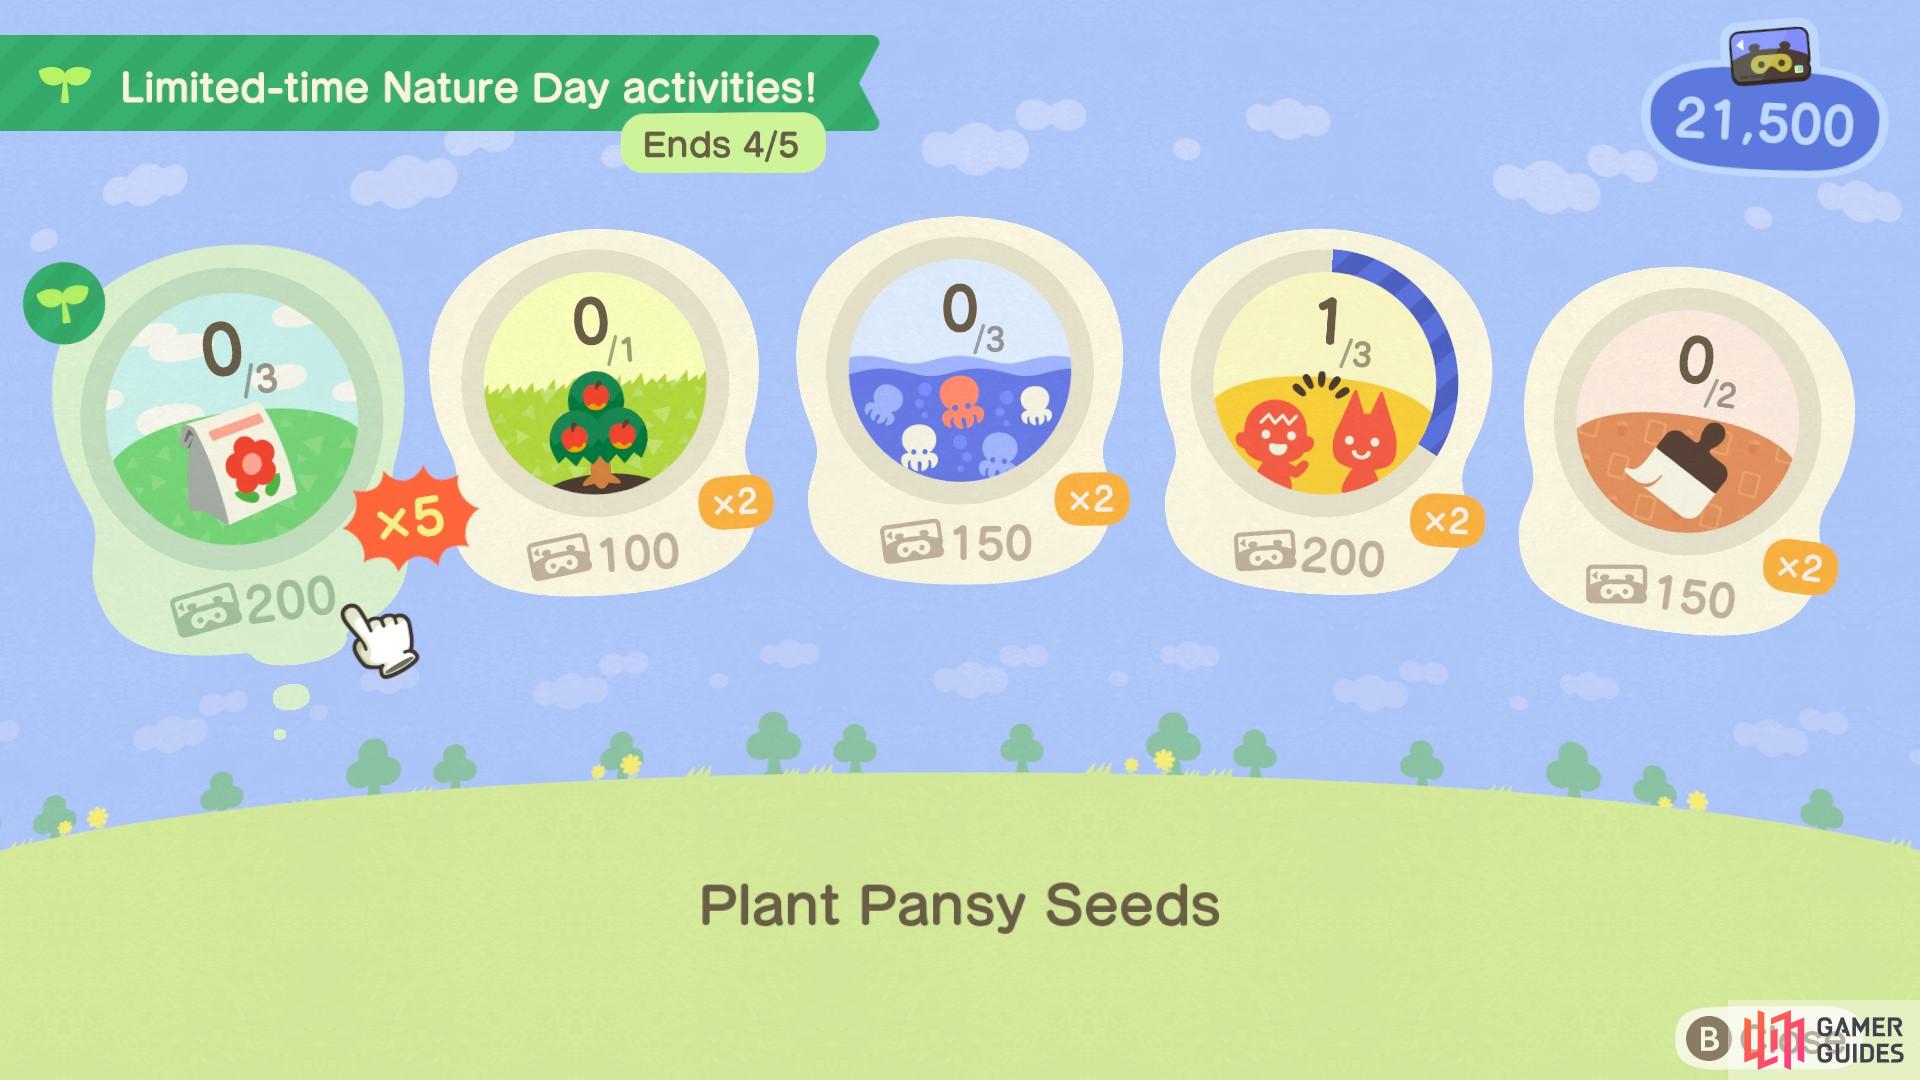 Nature Day encourages players to be more eco-friendly.